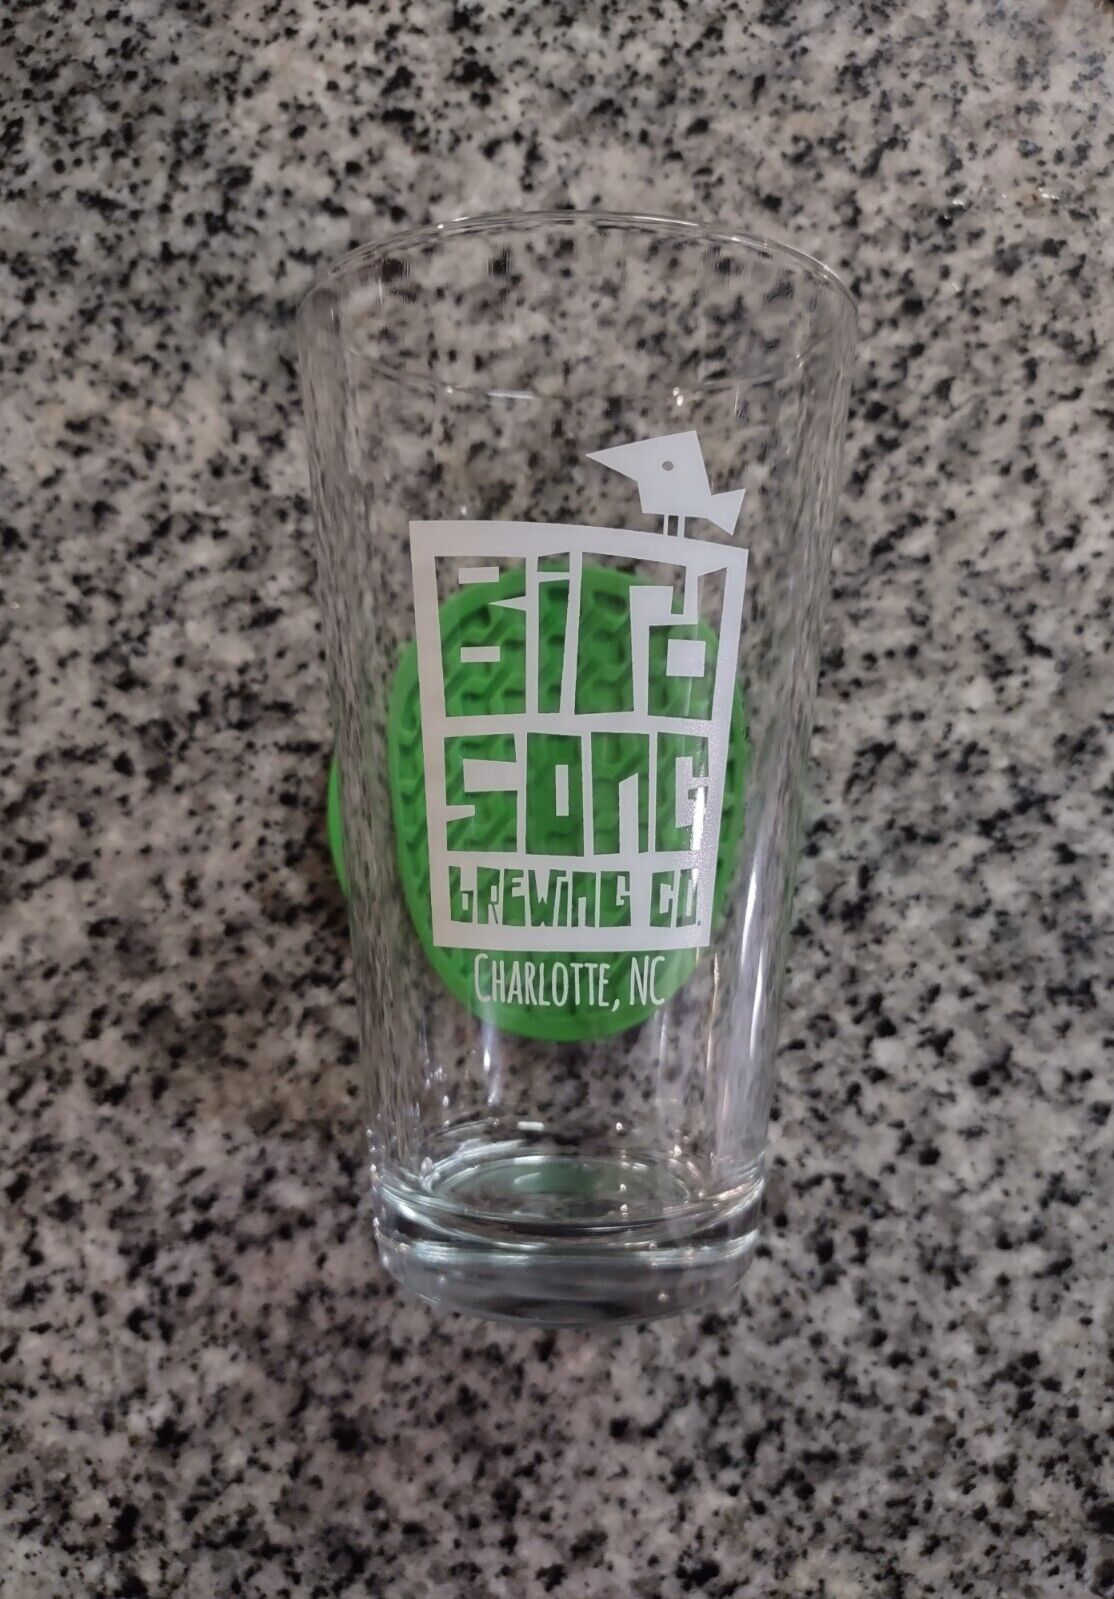 Bird Song Brewing Co. Beer Glass, Charlotte, NC